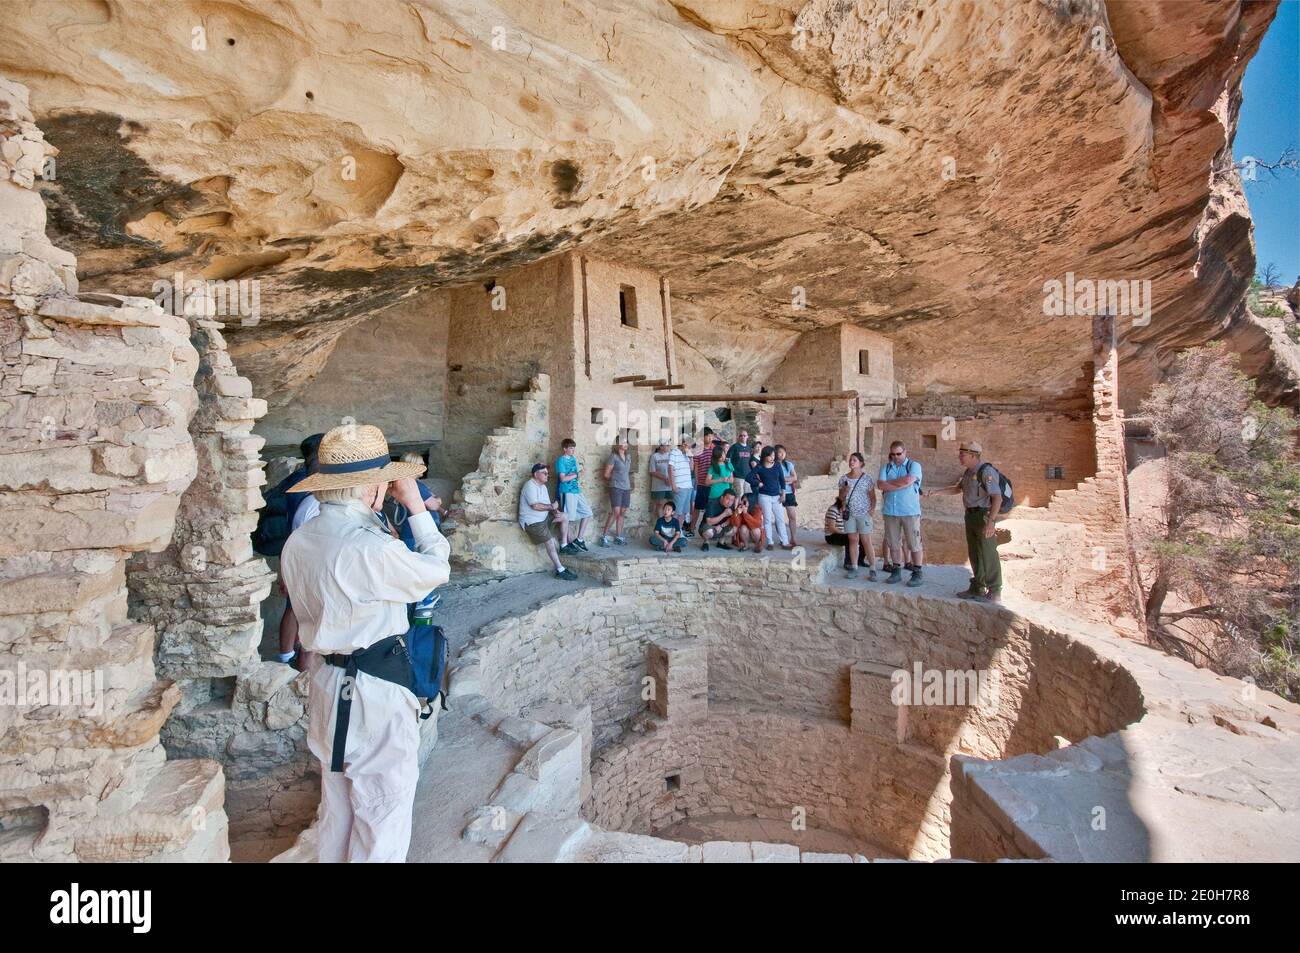 Park guide and visitors over kiva (ceremonial chamber) at Balcony House cliff dwelling, Cliff Palace Loop, Mesa Verde National Park, Colorado, USA Stock Photo